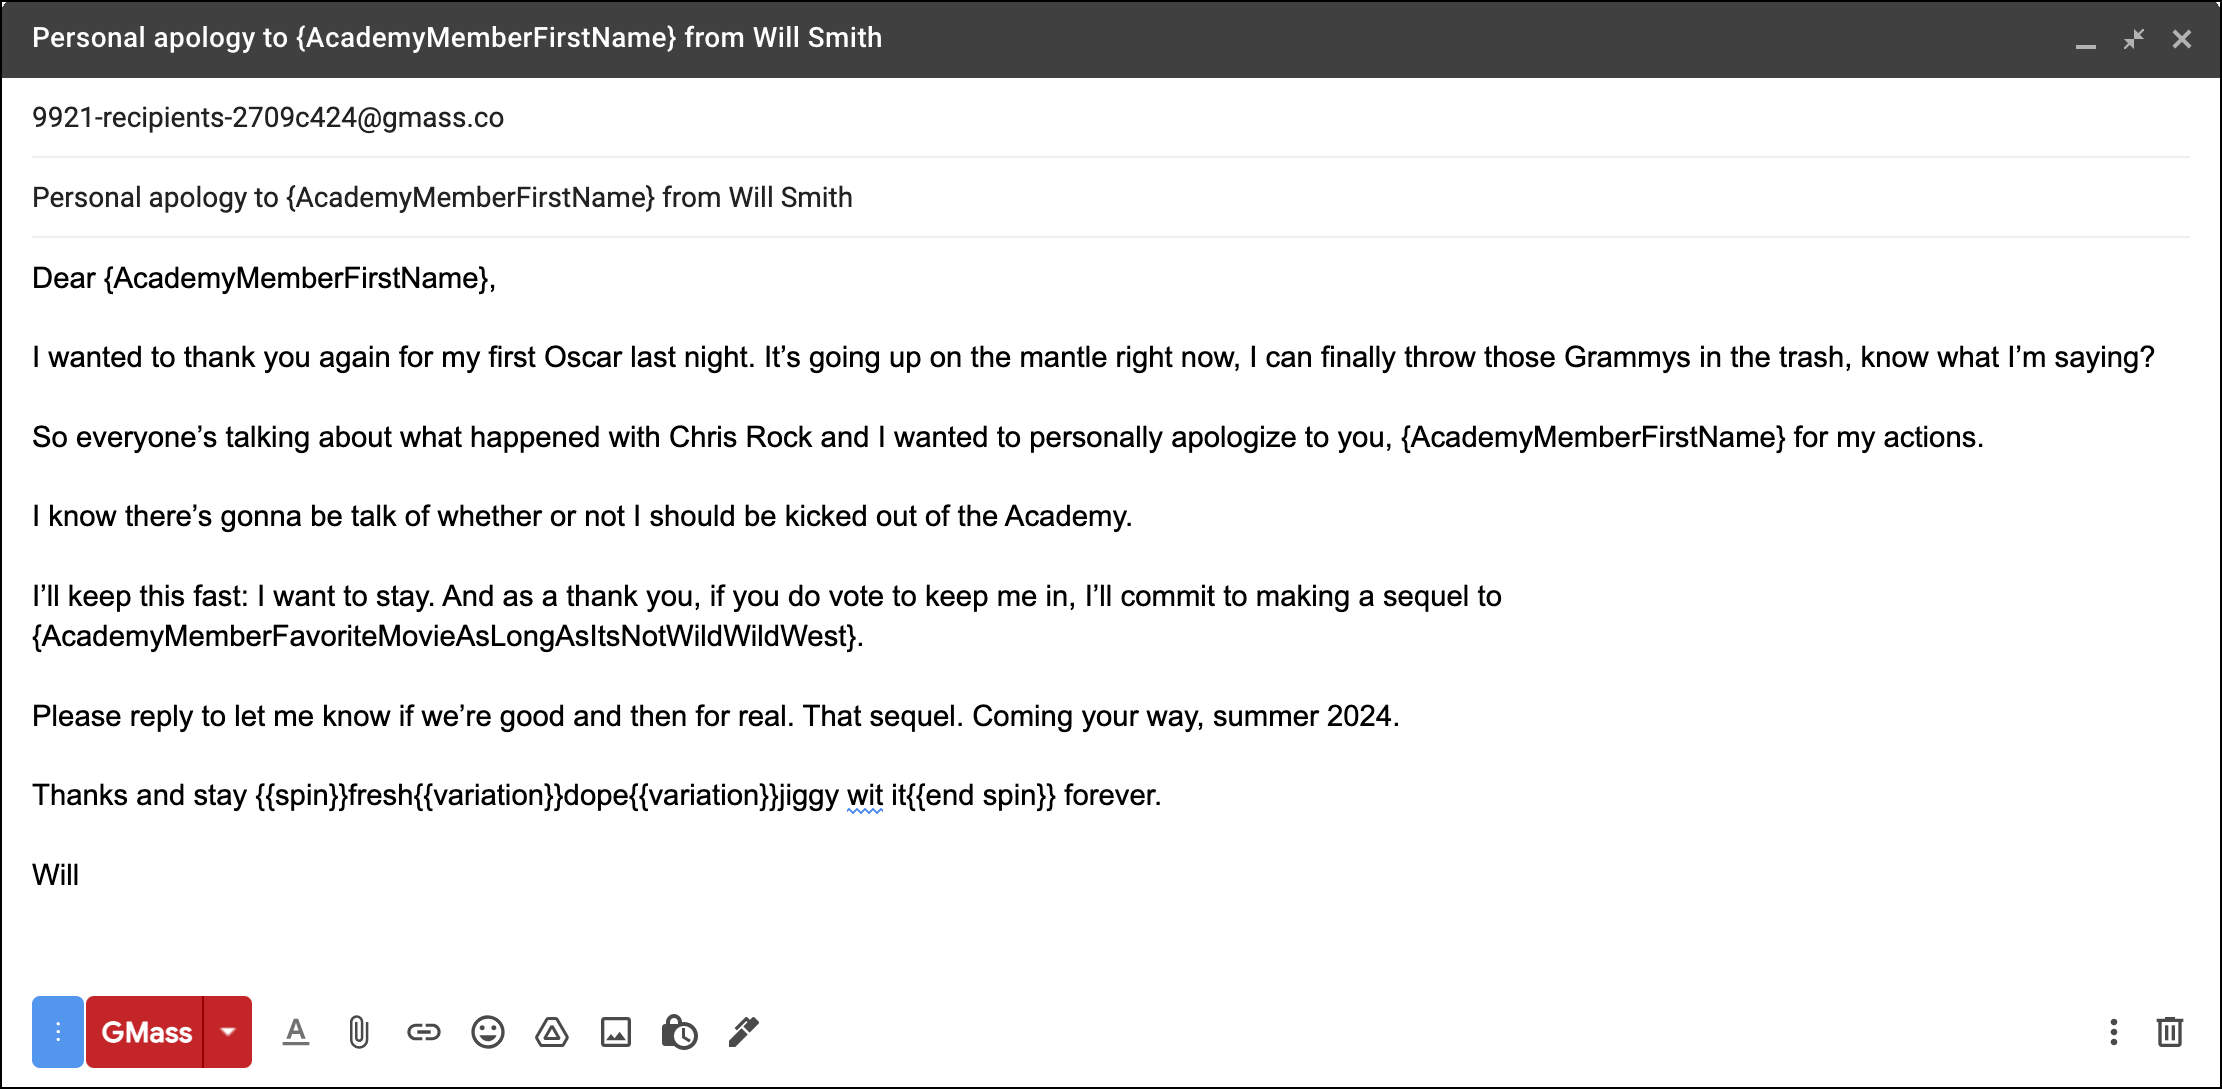 Will Smith's first email to the Academy